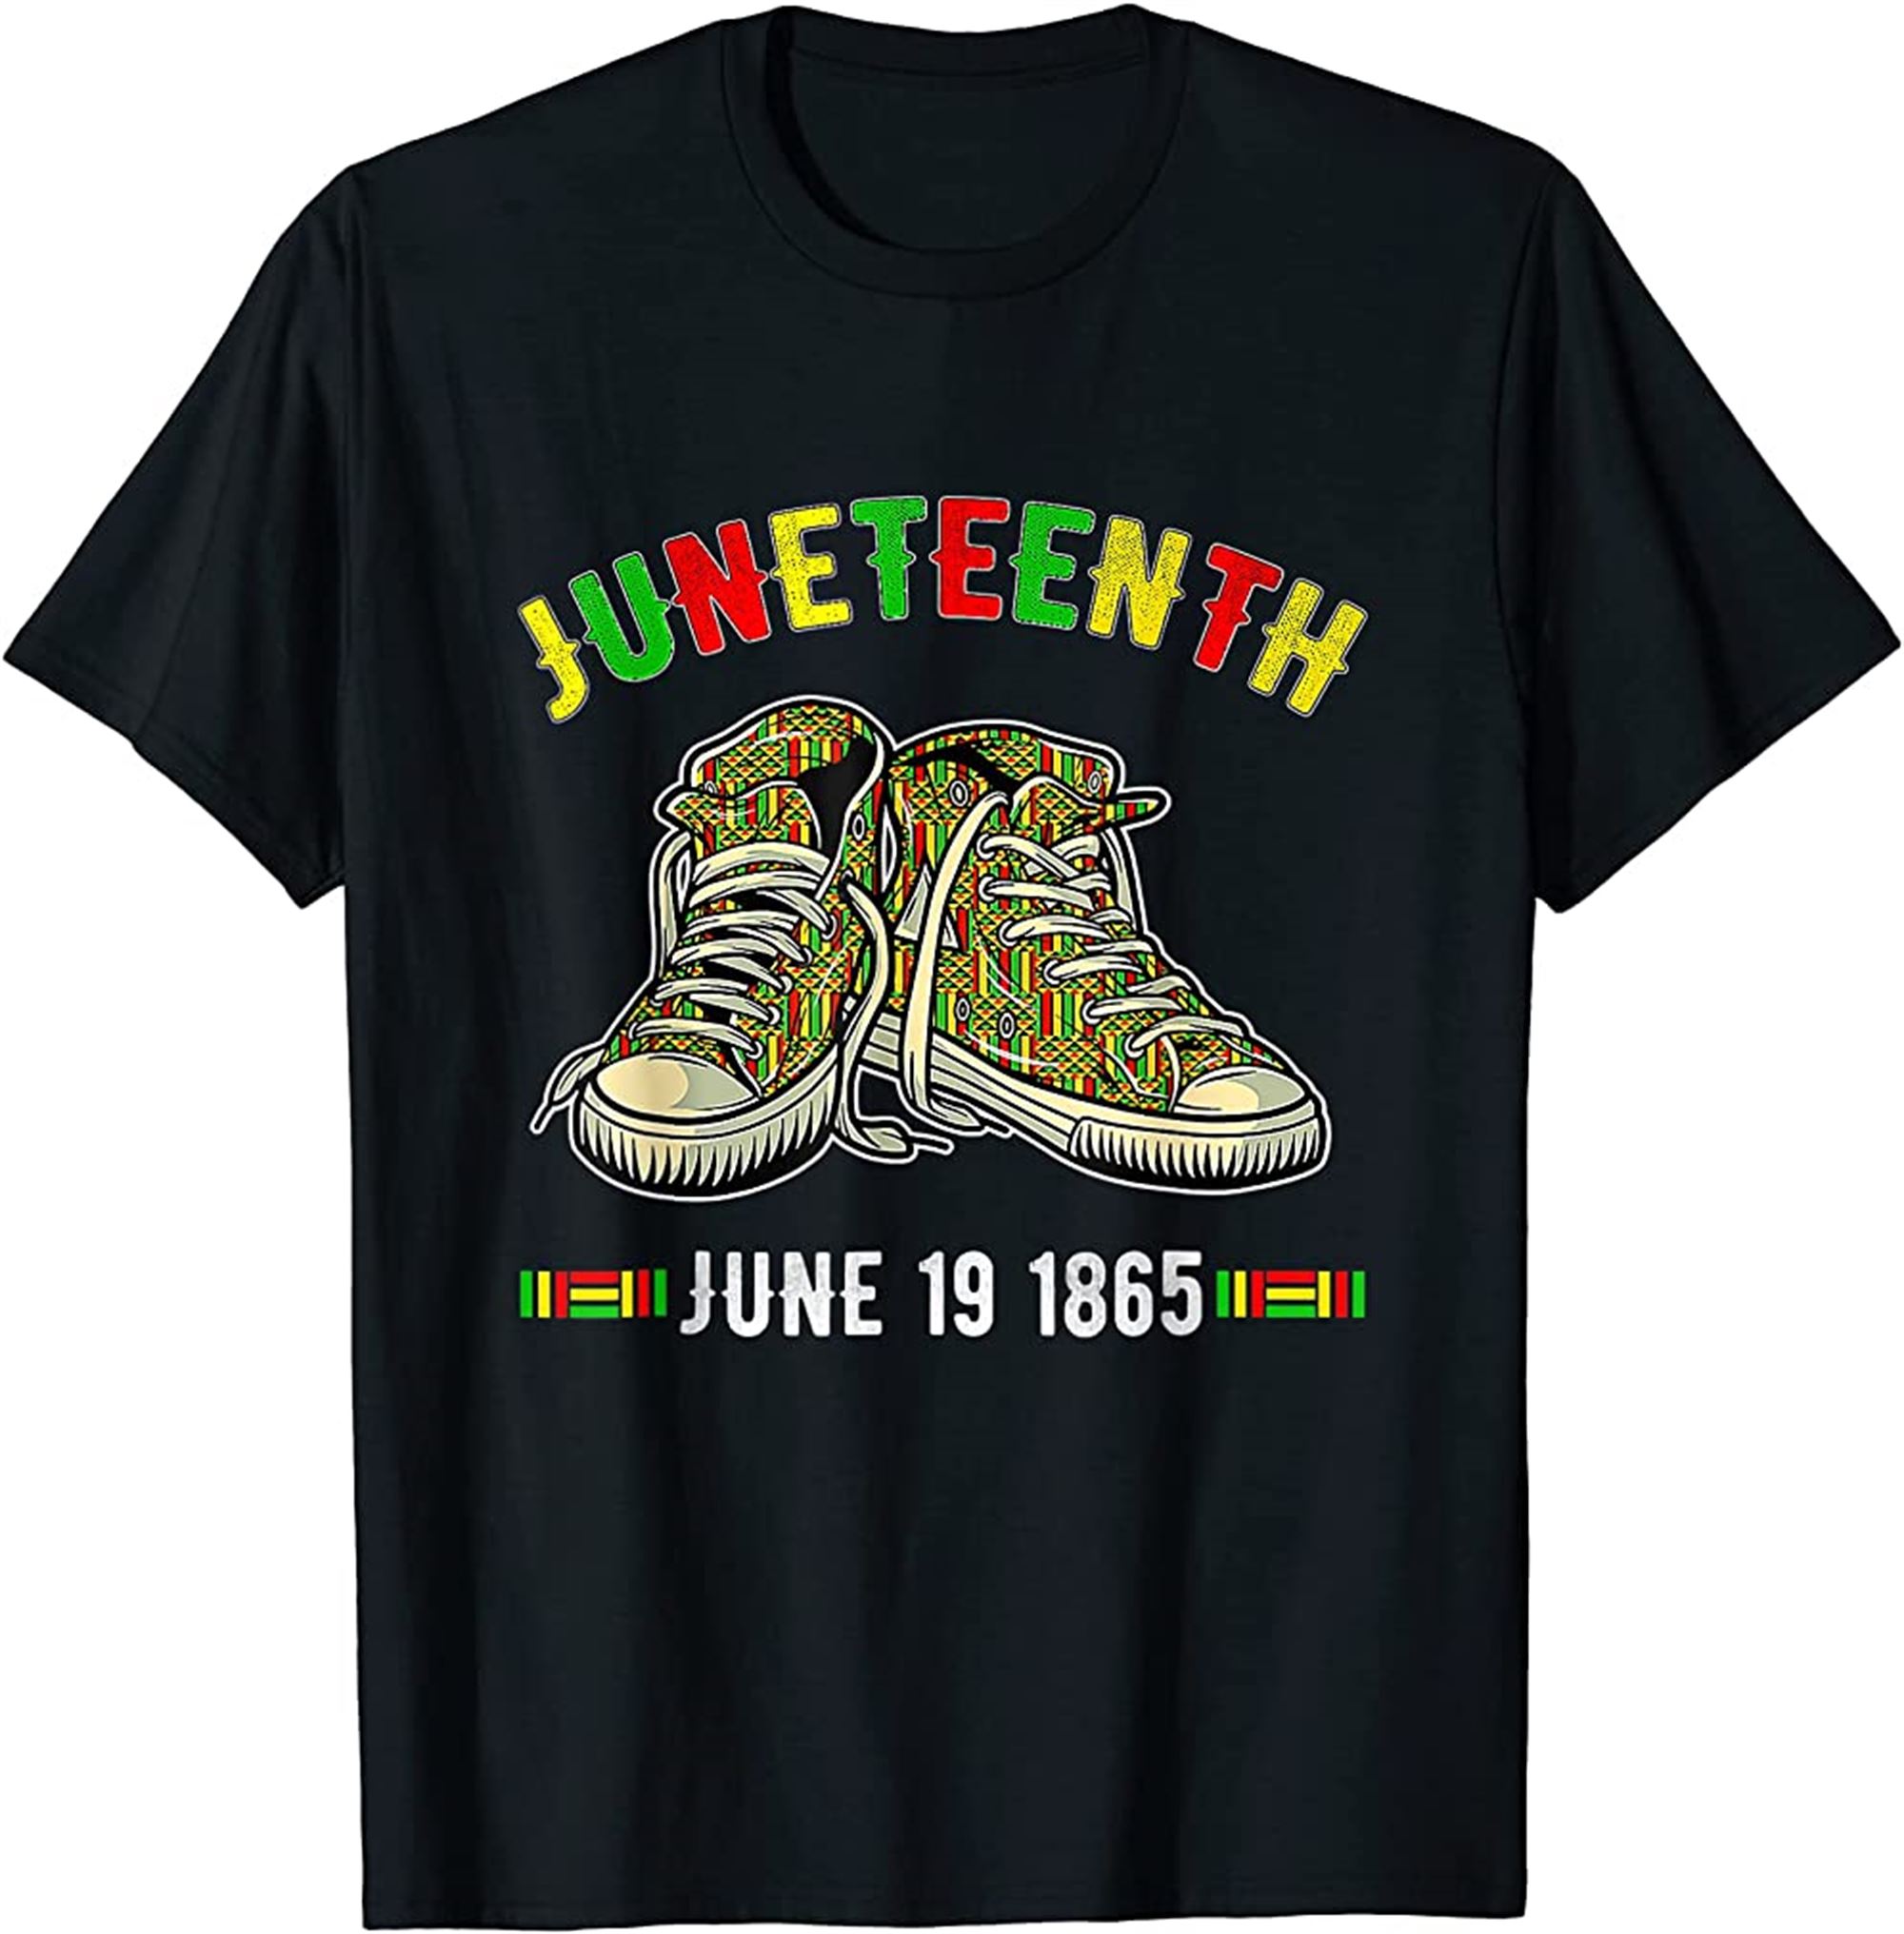 Uneteenth June 19 1865 Black African American Independence T-shirt Size Up To 5xl